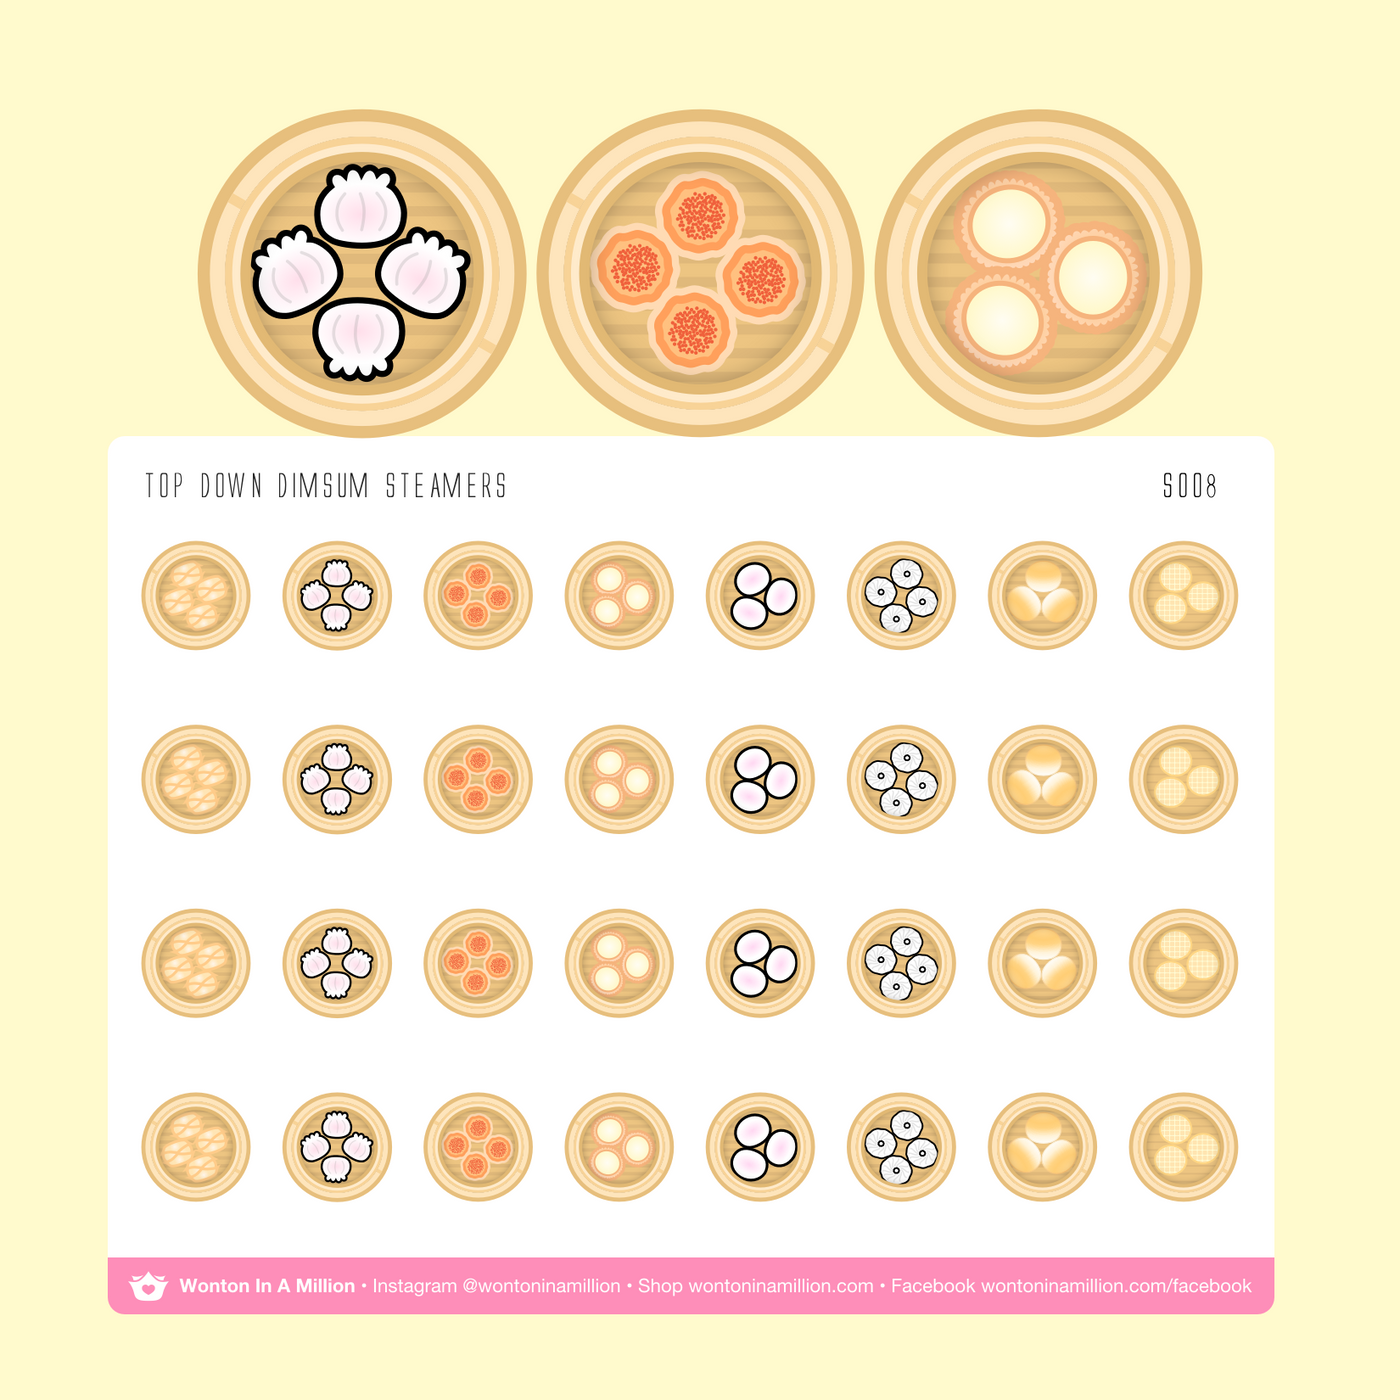 S008 | Top Down Dimsum Steamers Stickers